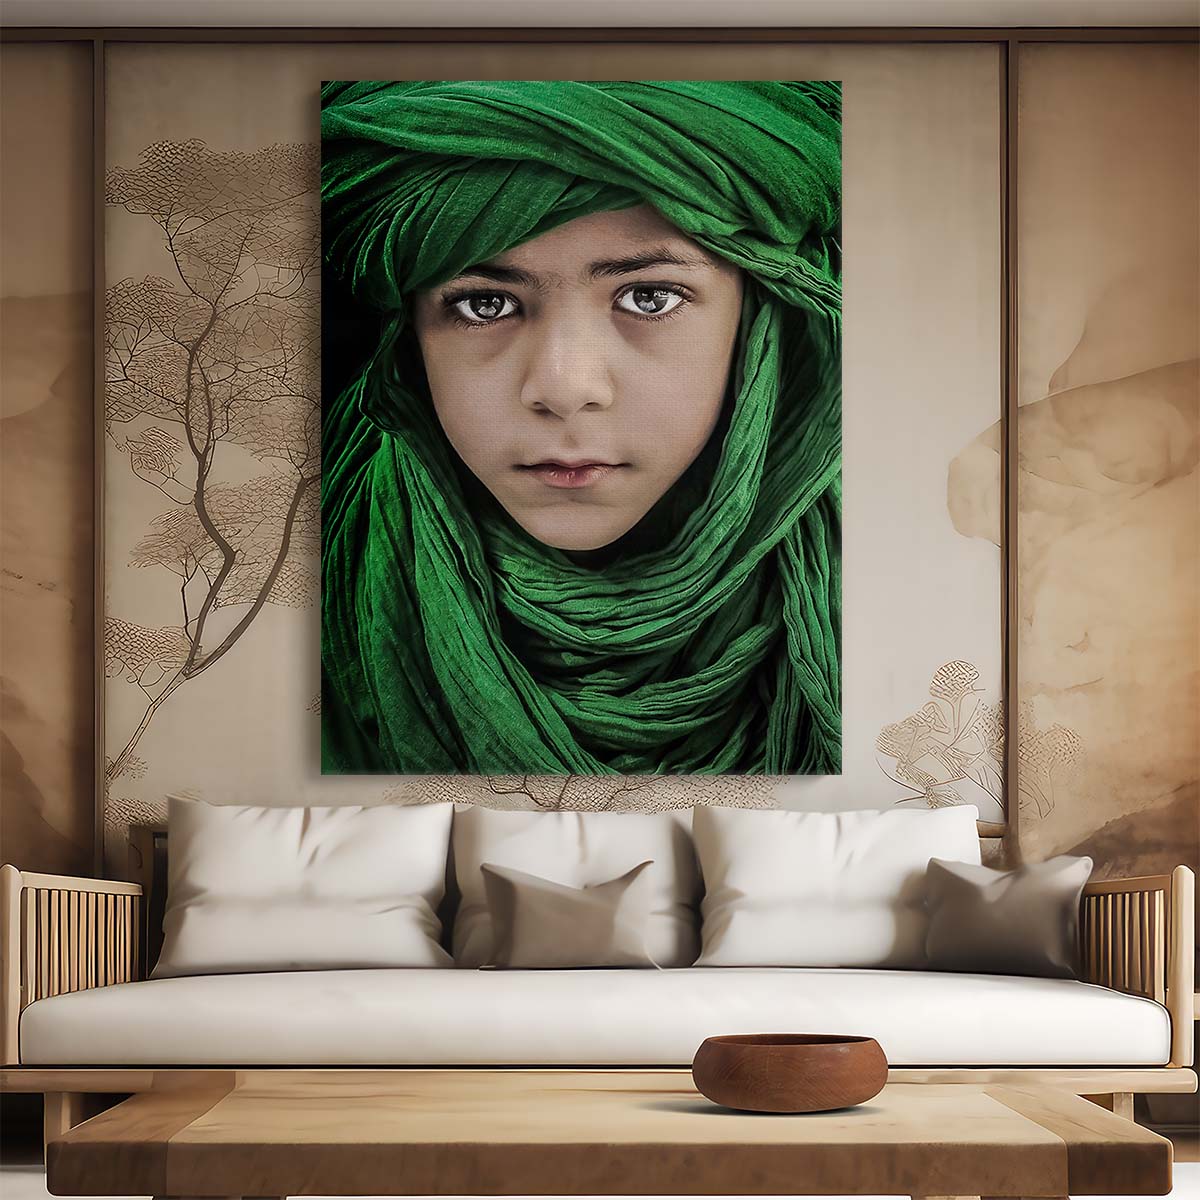 Green Turban Boy Portrait - Emotional Child Face Photography Art by Luxuriance Designs, made in USA